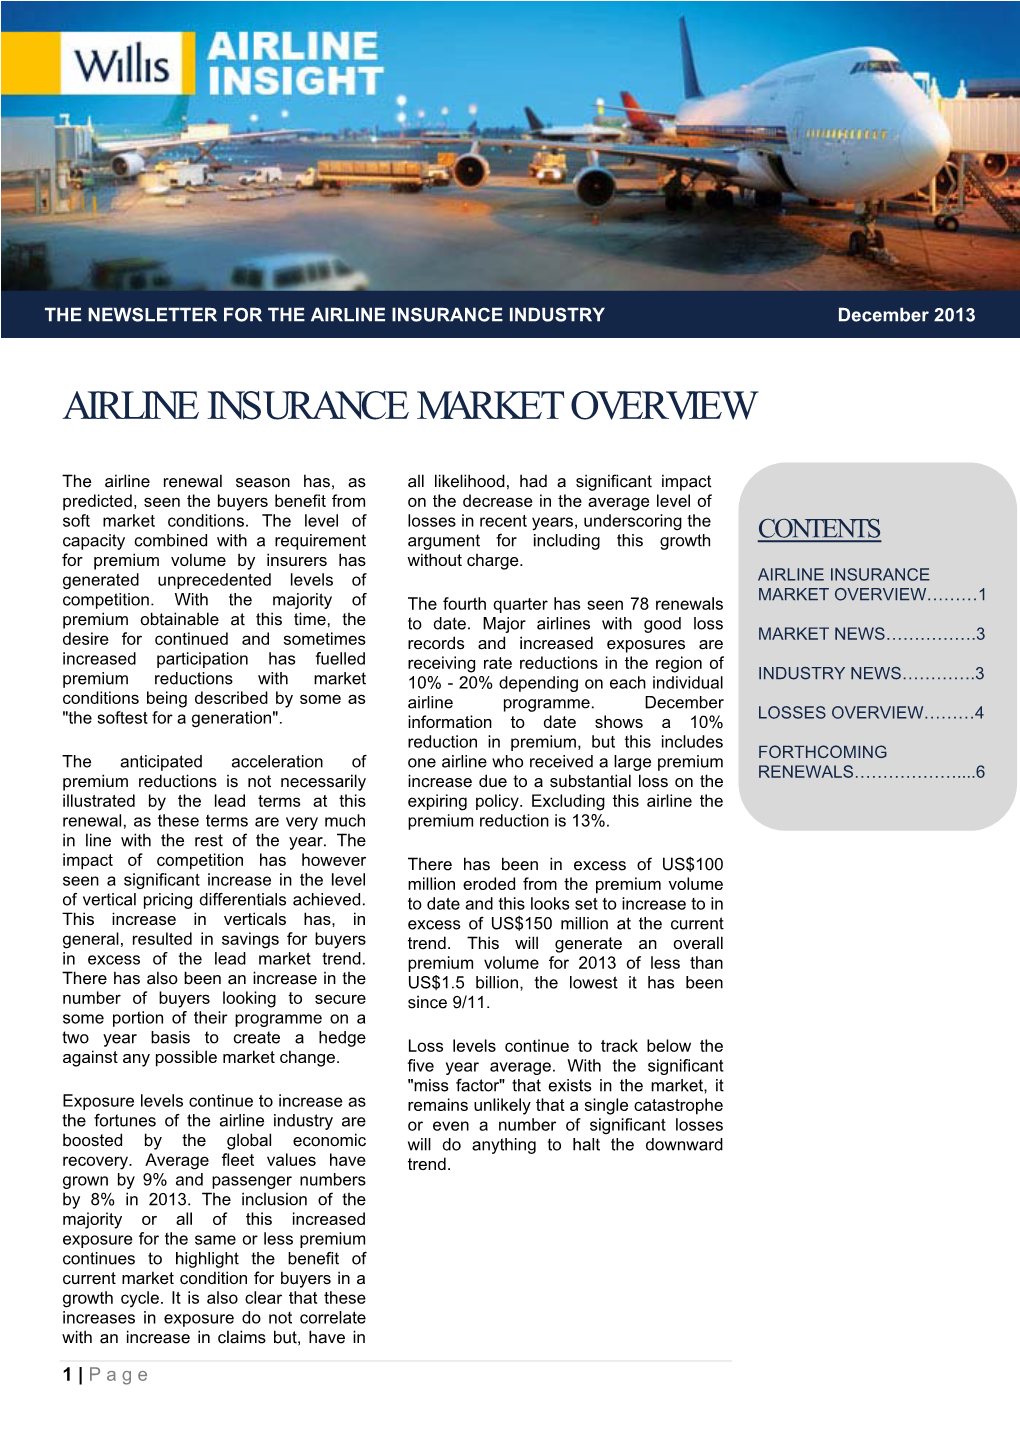 Airline Insurance Market Overview